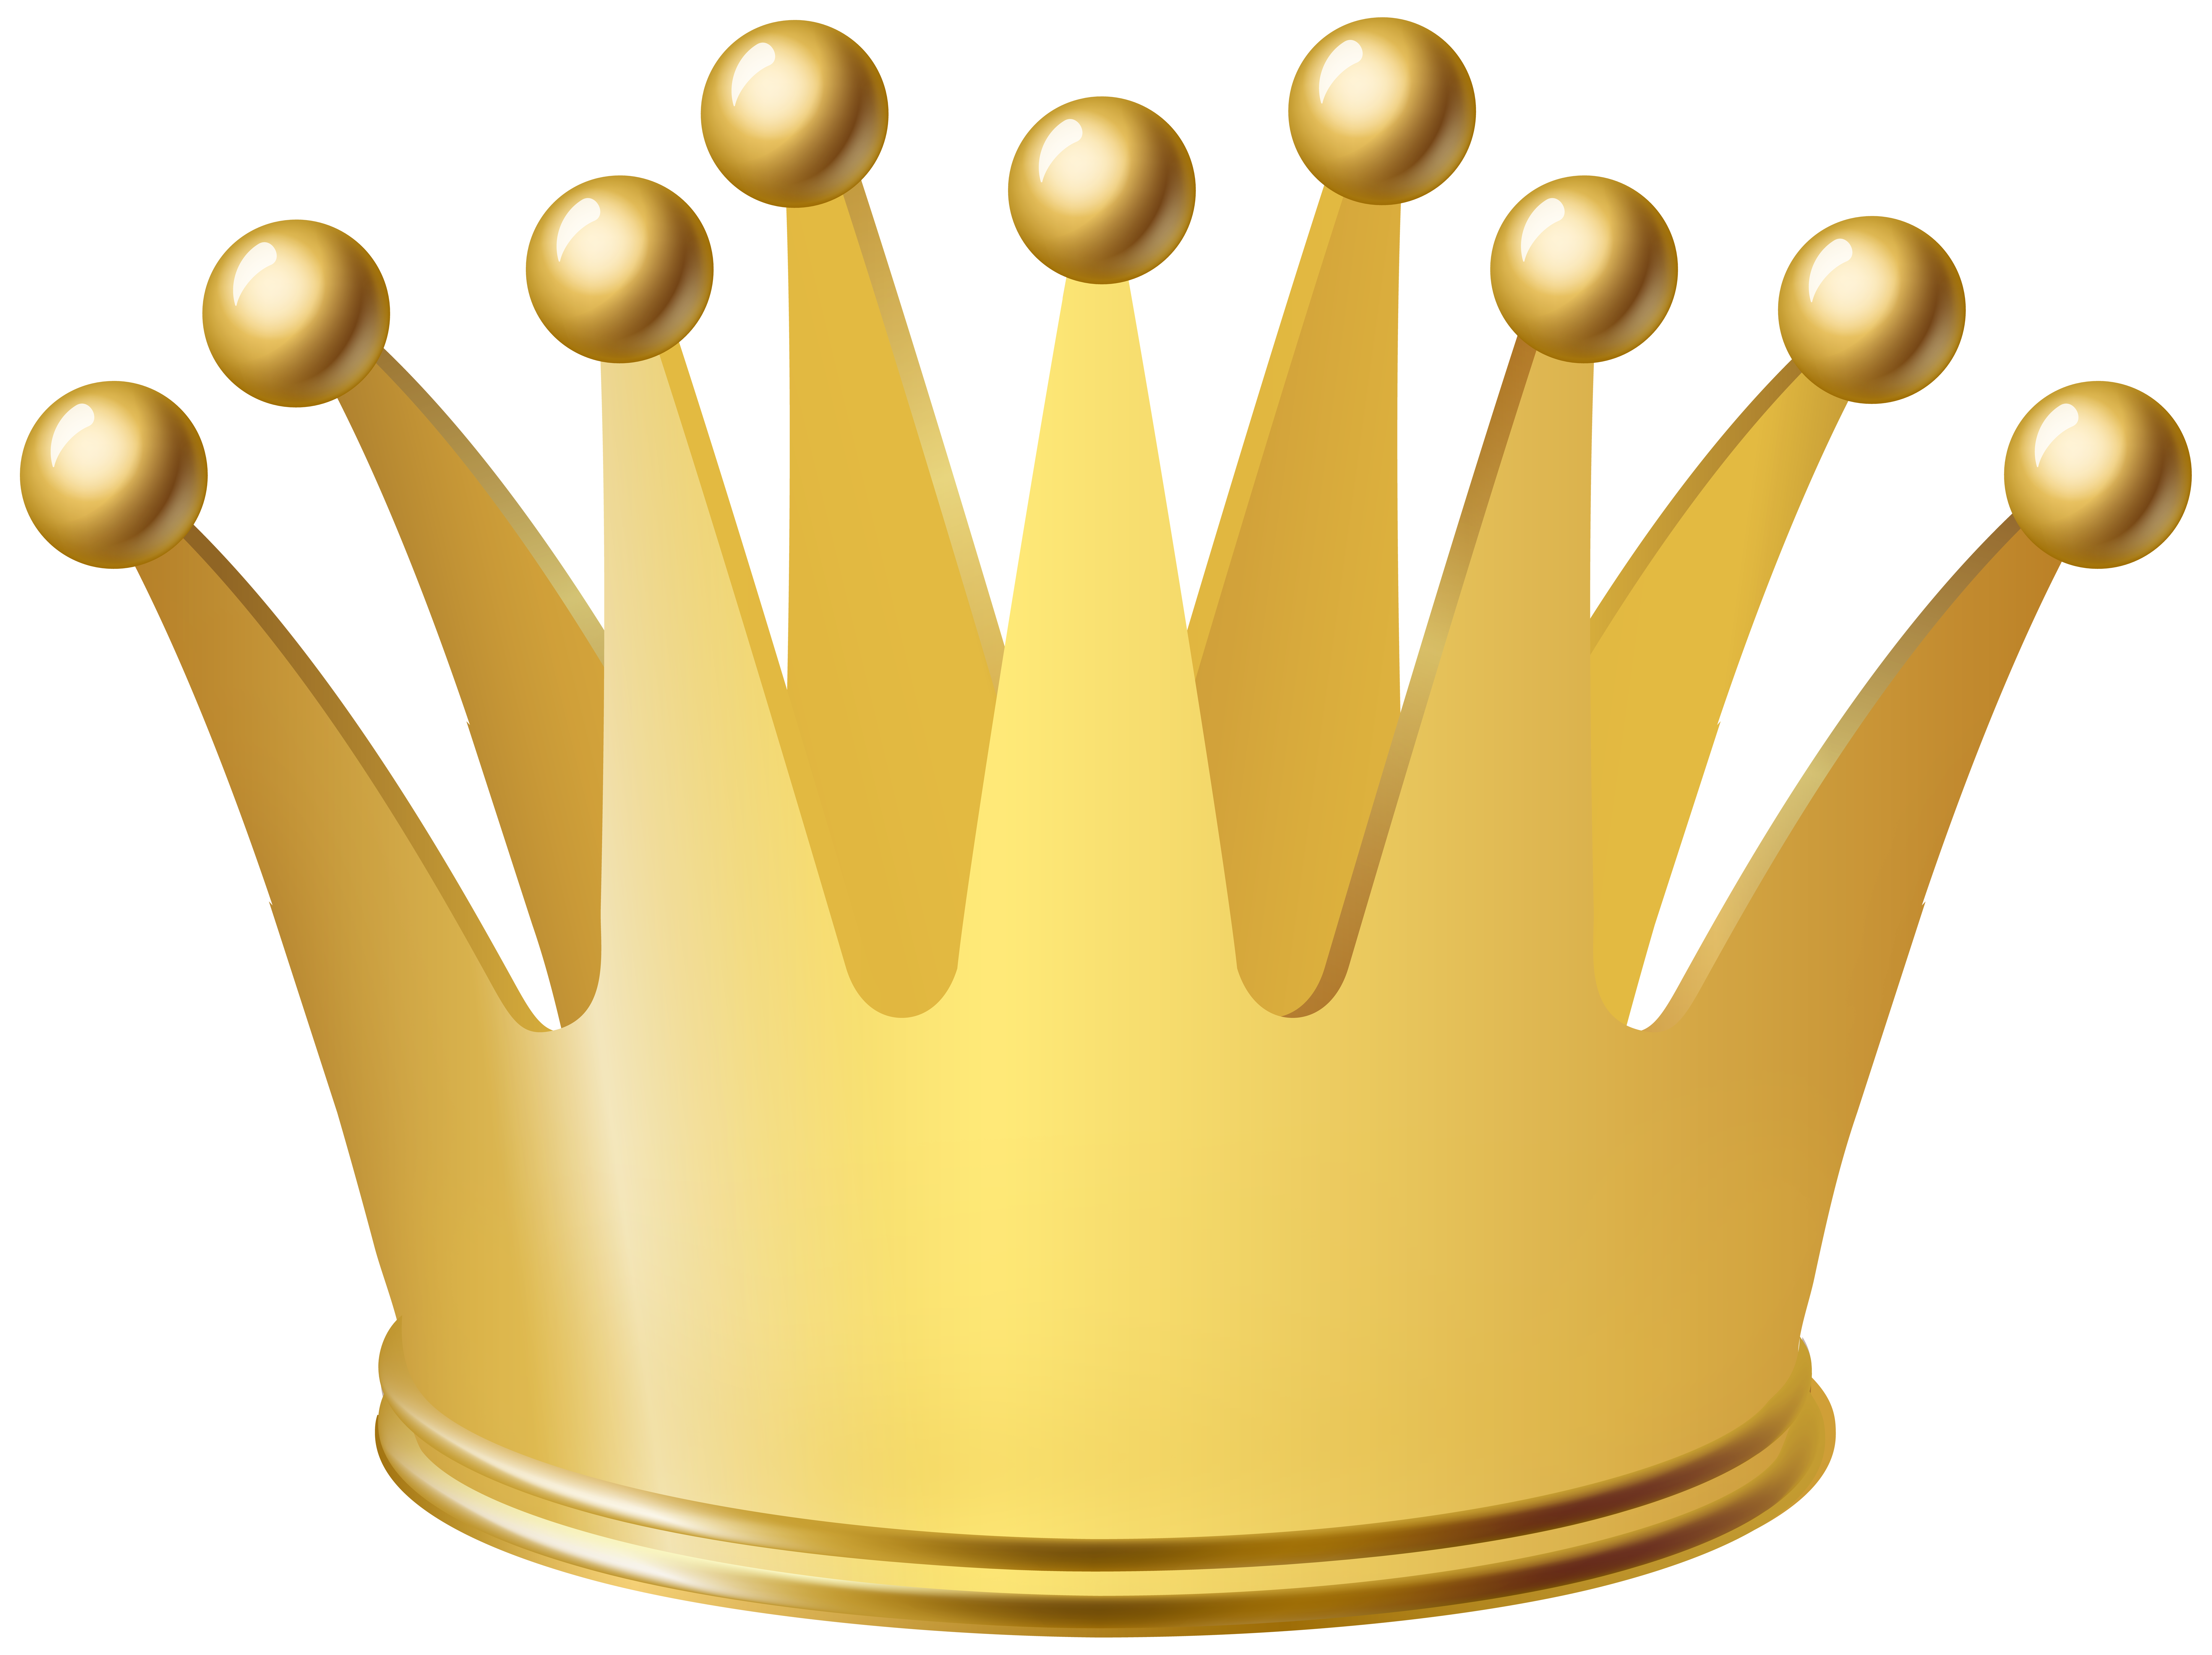 real king crowns png